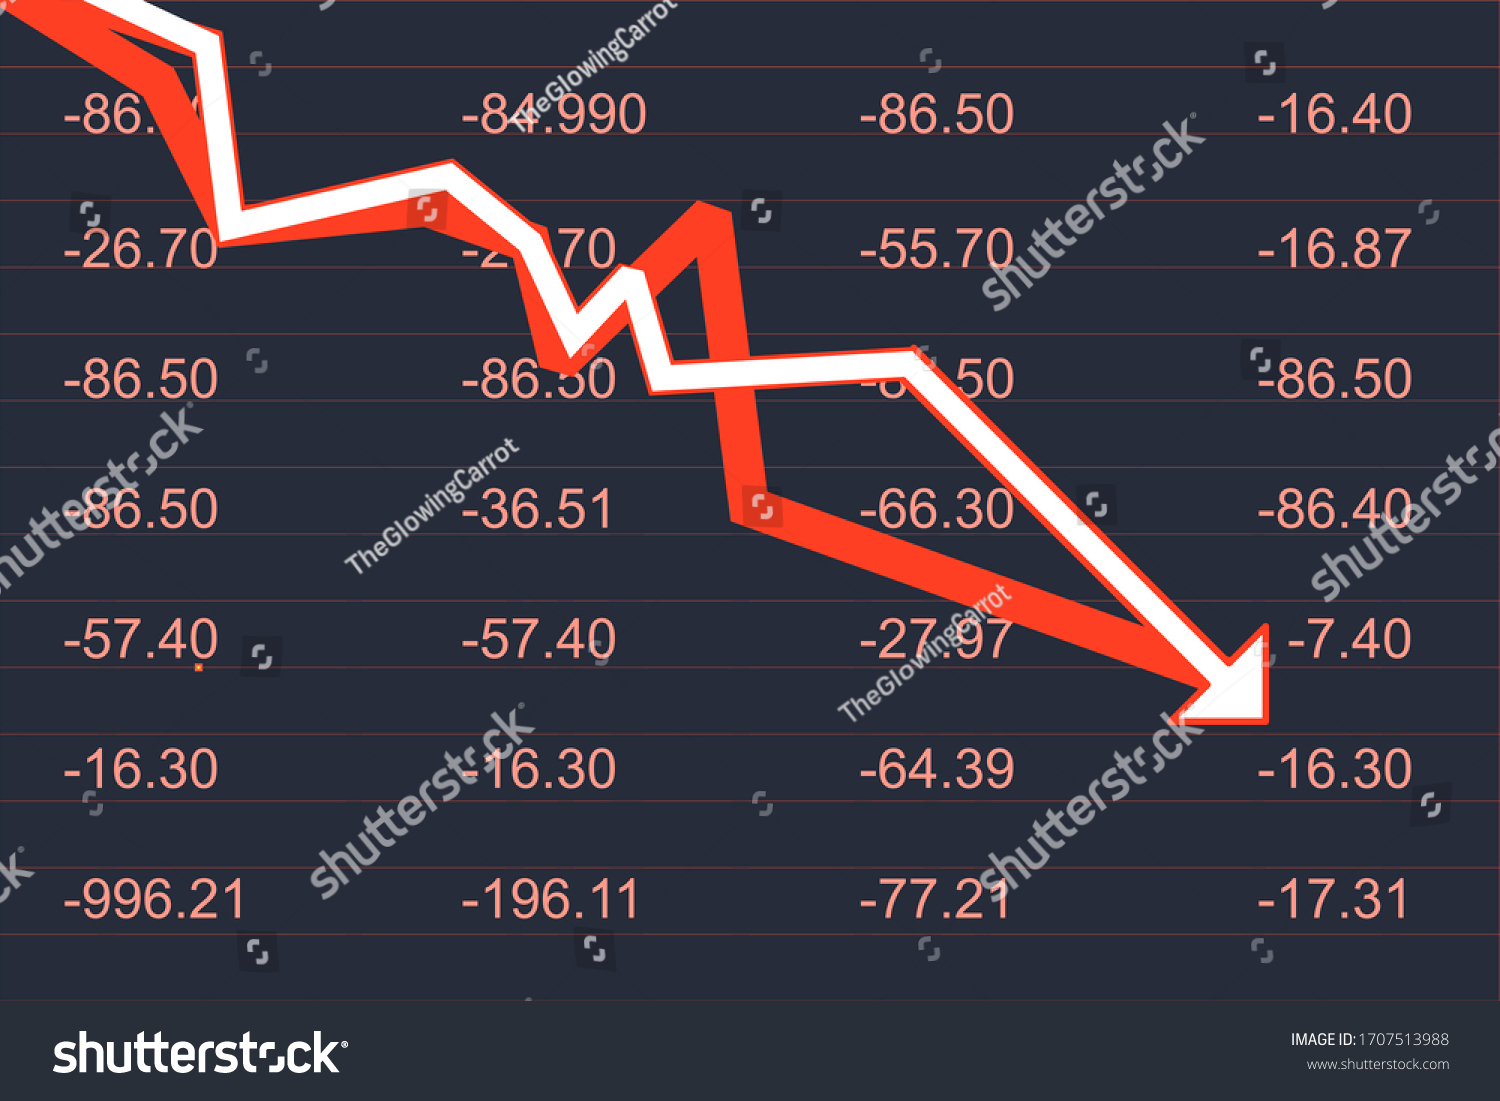 SVG of Red arrow going down in front of numbers. Concept representing stock market crash. svg